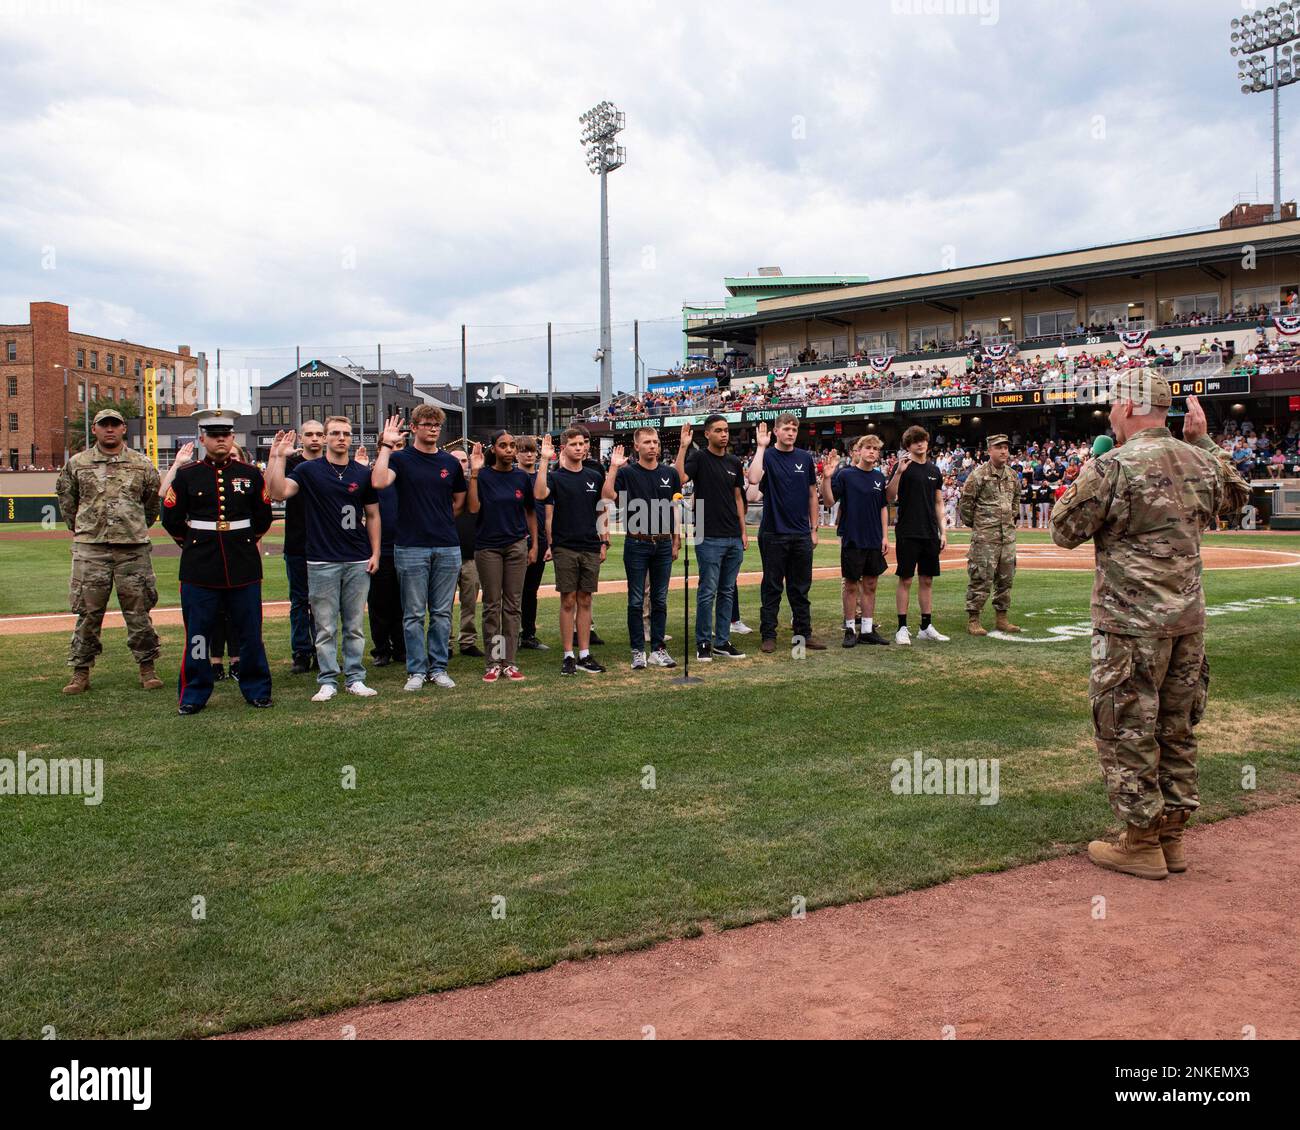 Col. Christopher Meeker, 88th Air Base Wing and Wright-Patterson Air Force Base commander, gives the oath of office to a group of Airmen and Marines during a Dayton Dragons baseball game Aug. 13, 2022 at Day Air Ballpark, Dayton, Ohio. Stock Photo